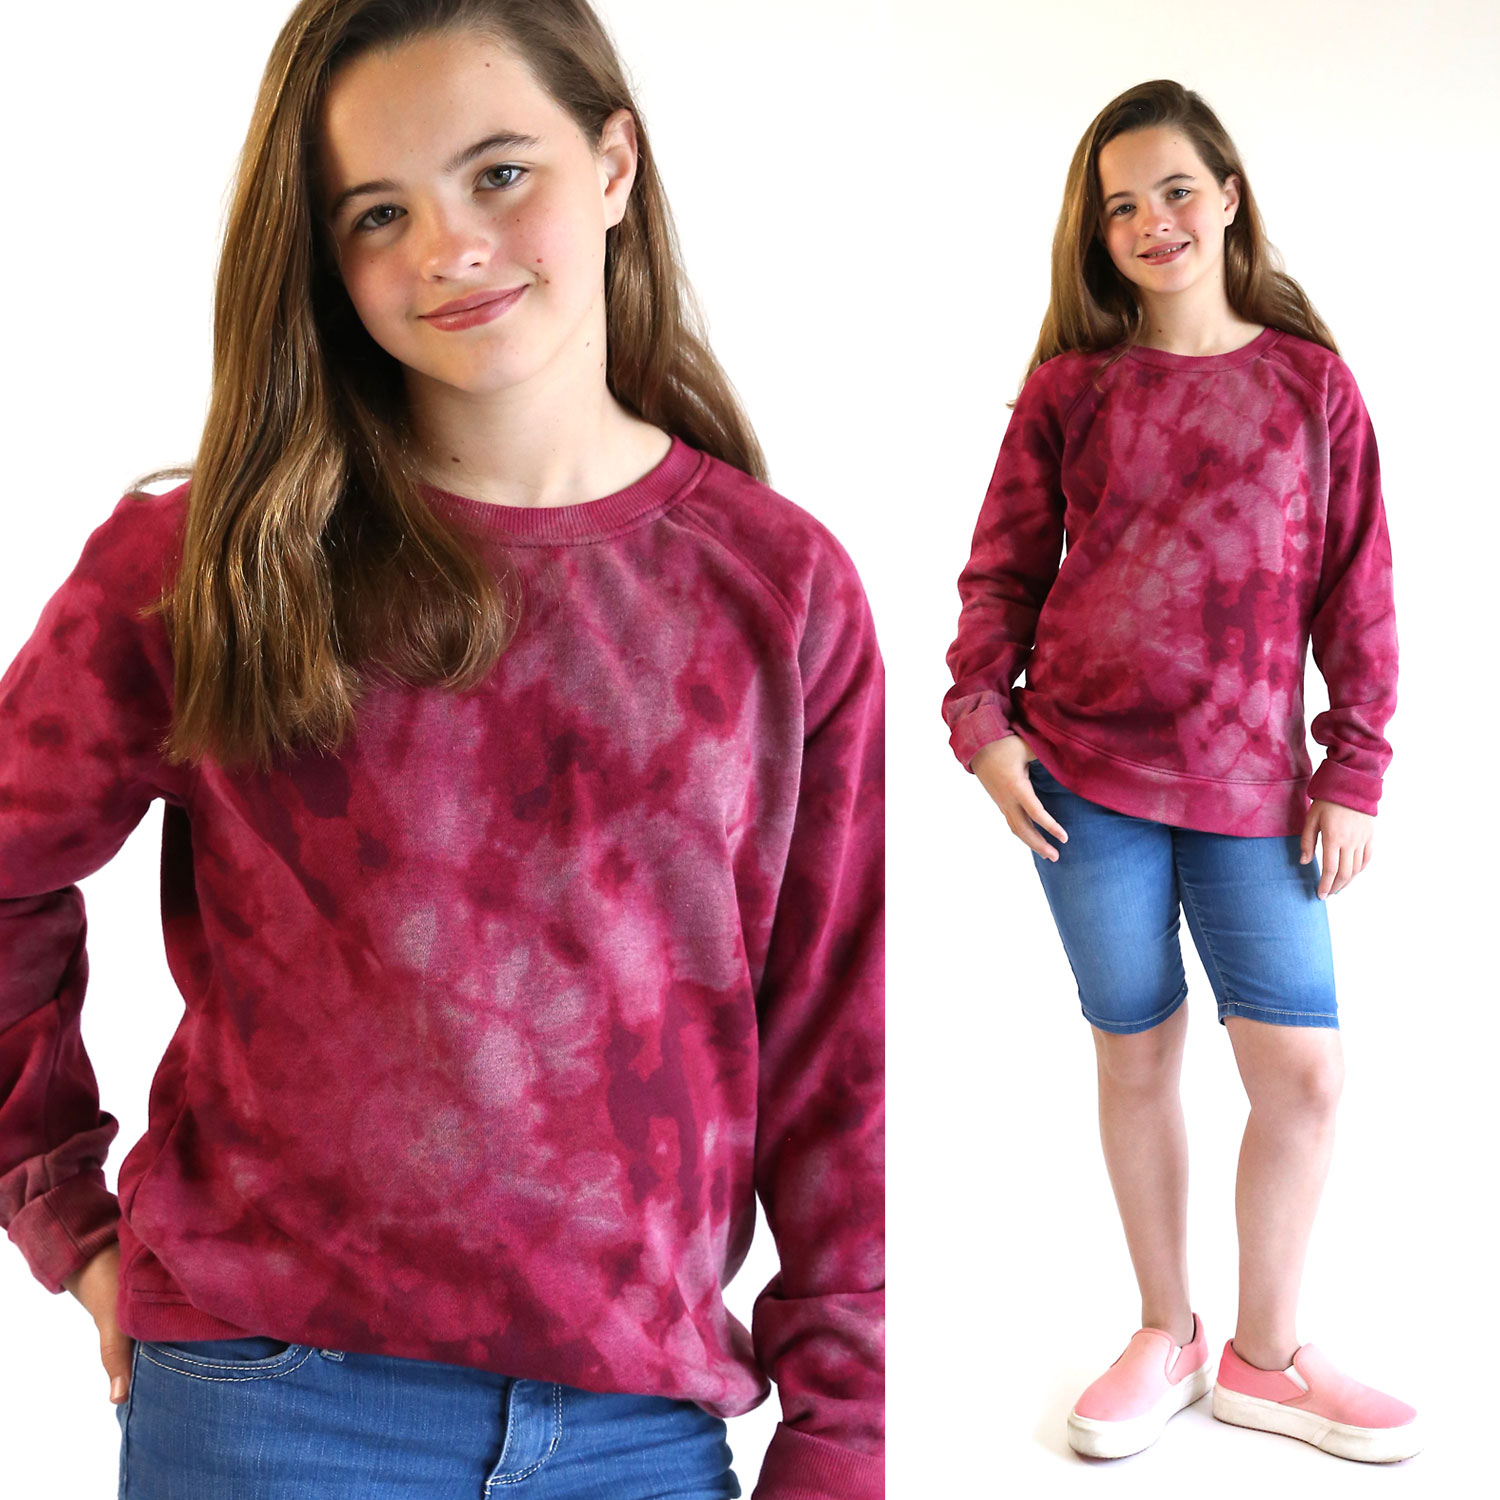 Tie Dye Tee Shirt for Boys or Girls Hand Dyed in Primary Rainbow